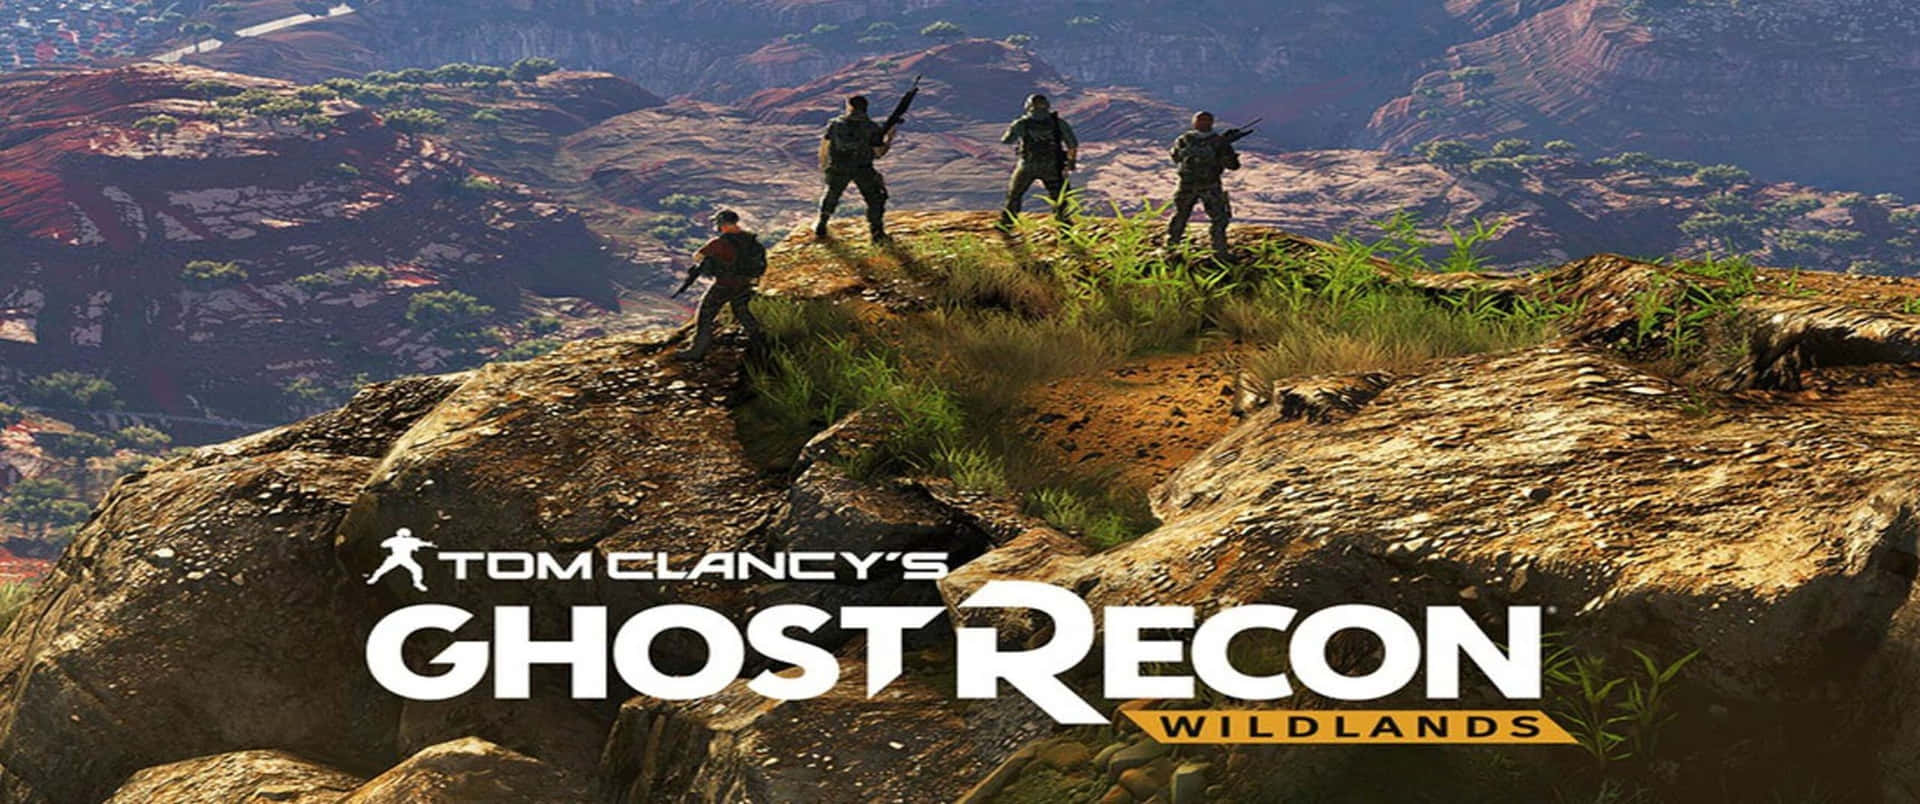 Embark on an Adventure to Bolivia in Ghost Recon Wildlands